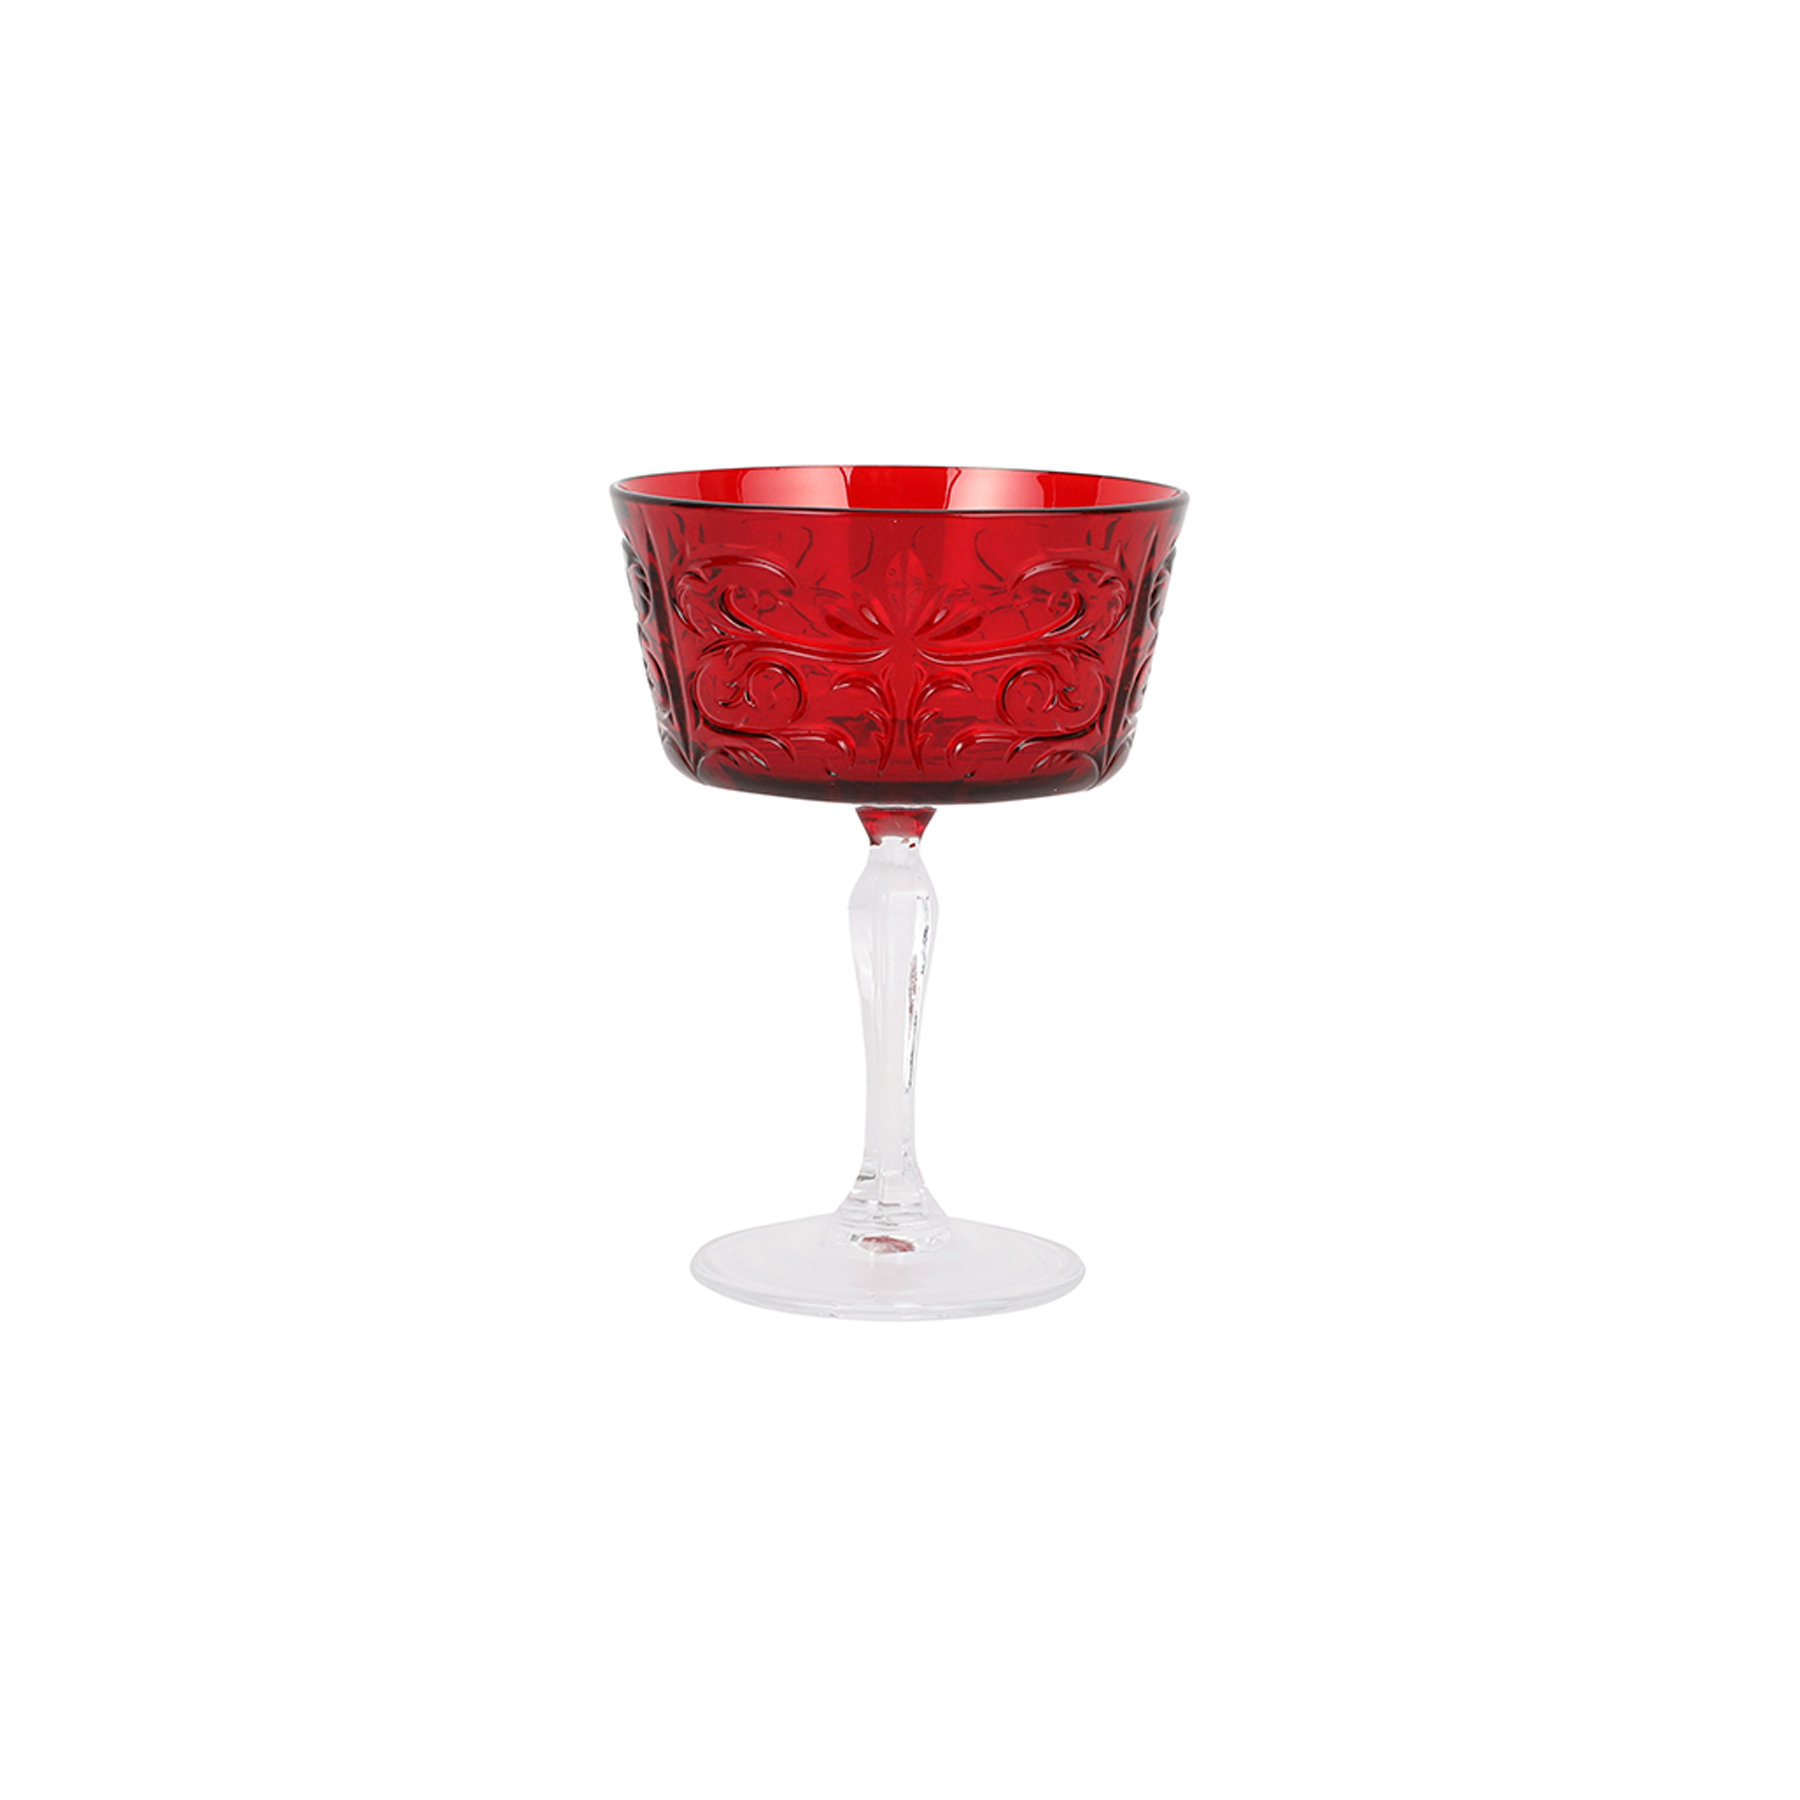 Elcio 17 oz. Christmas Joy Stemmed Wine Glass with Matching Gift Box The Holiday Aisle